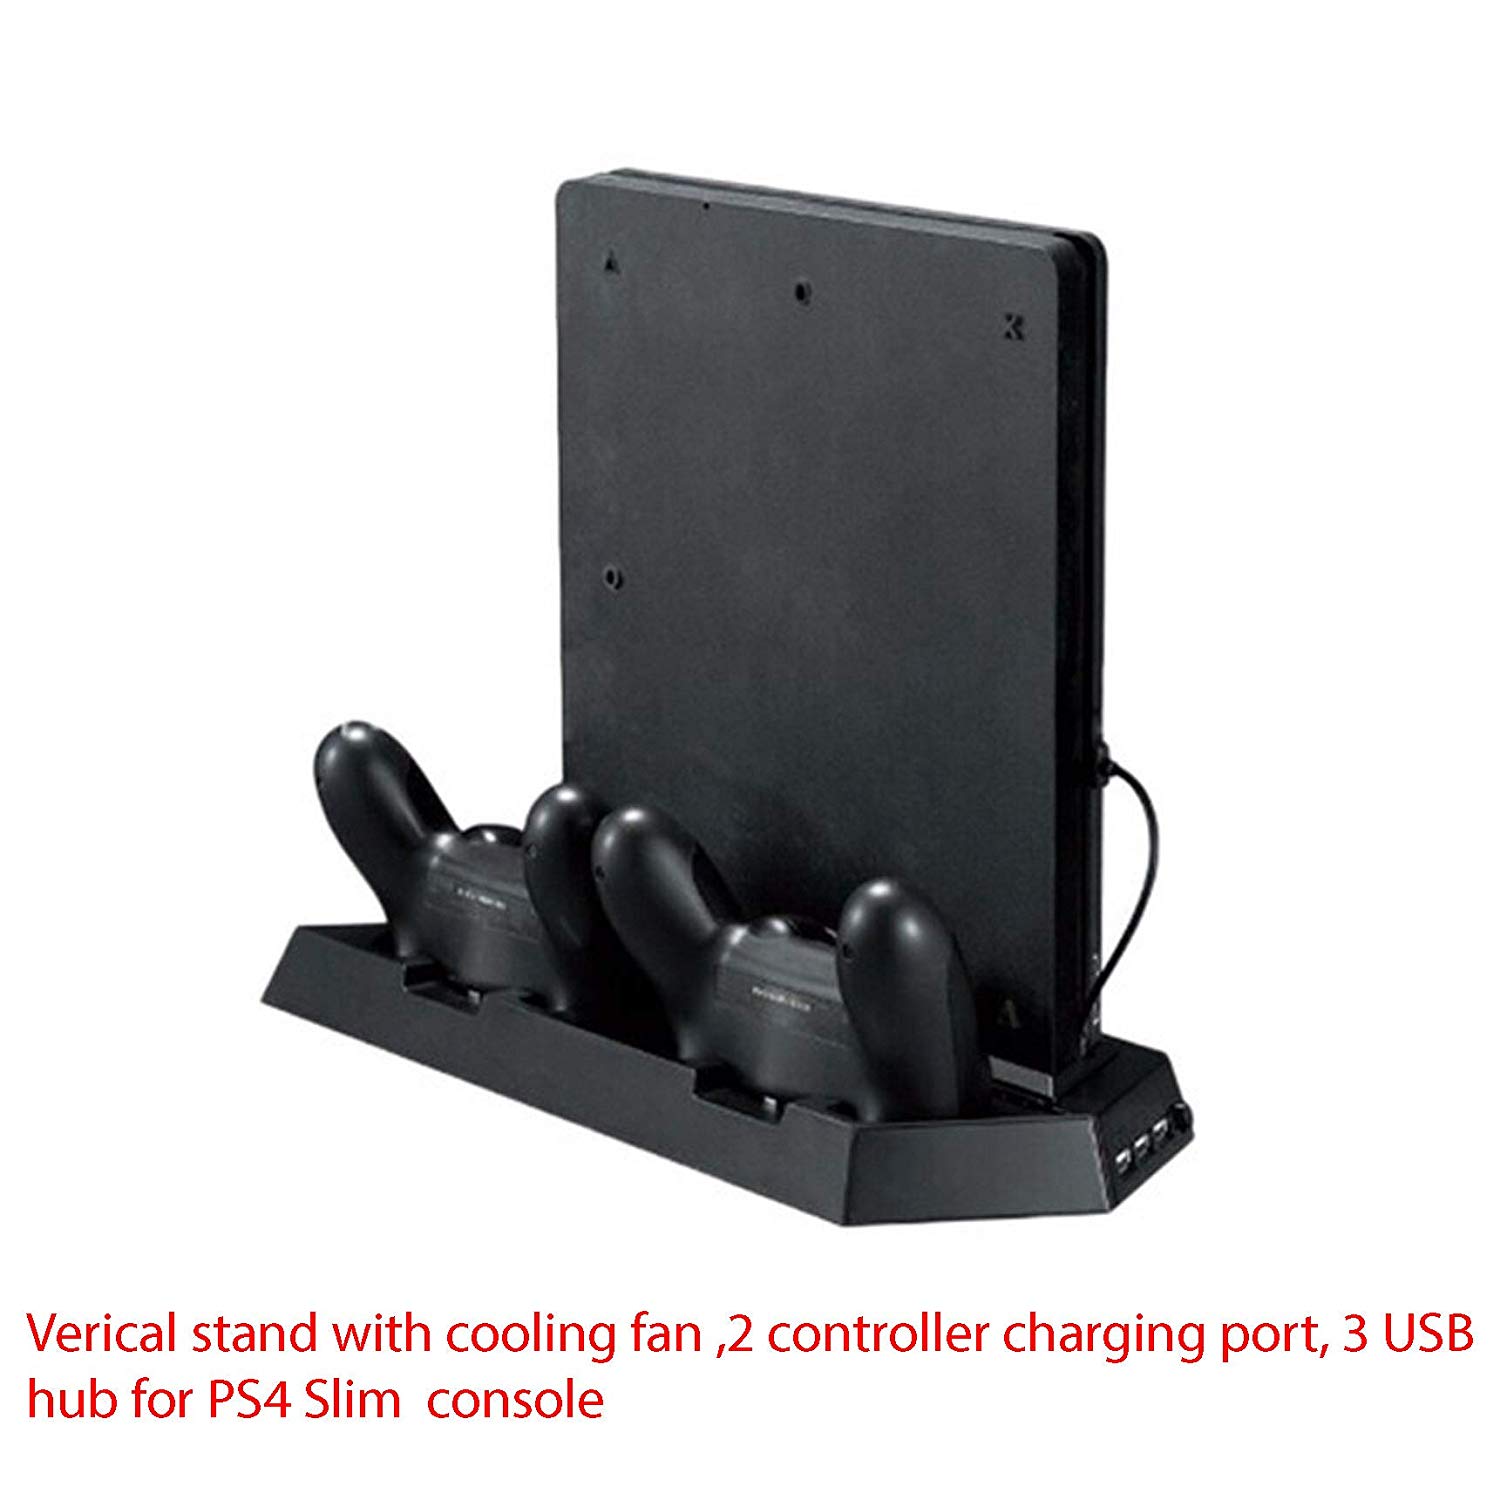 New World Vertical Stand with Cooling fan with Dual Charger Charging Dock with usb hub For PS4 Slim Sony Playstation 4